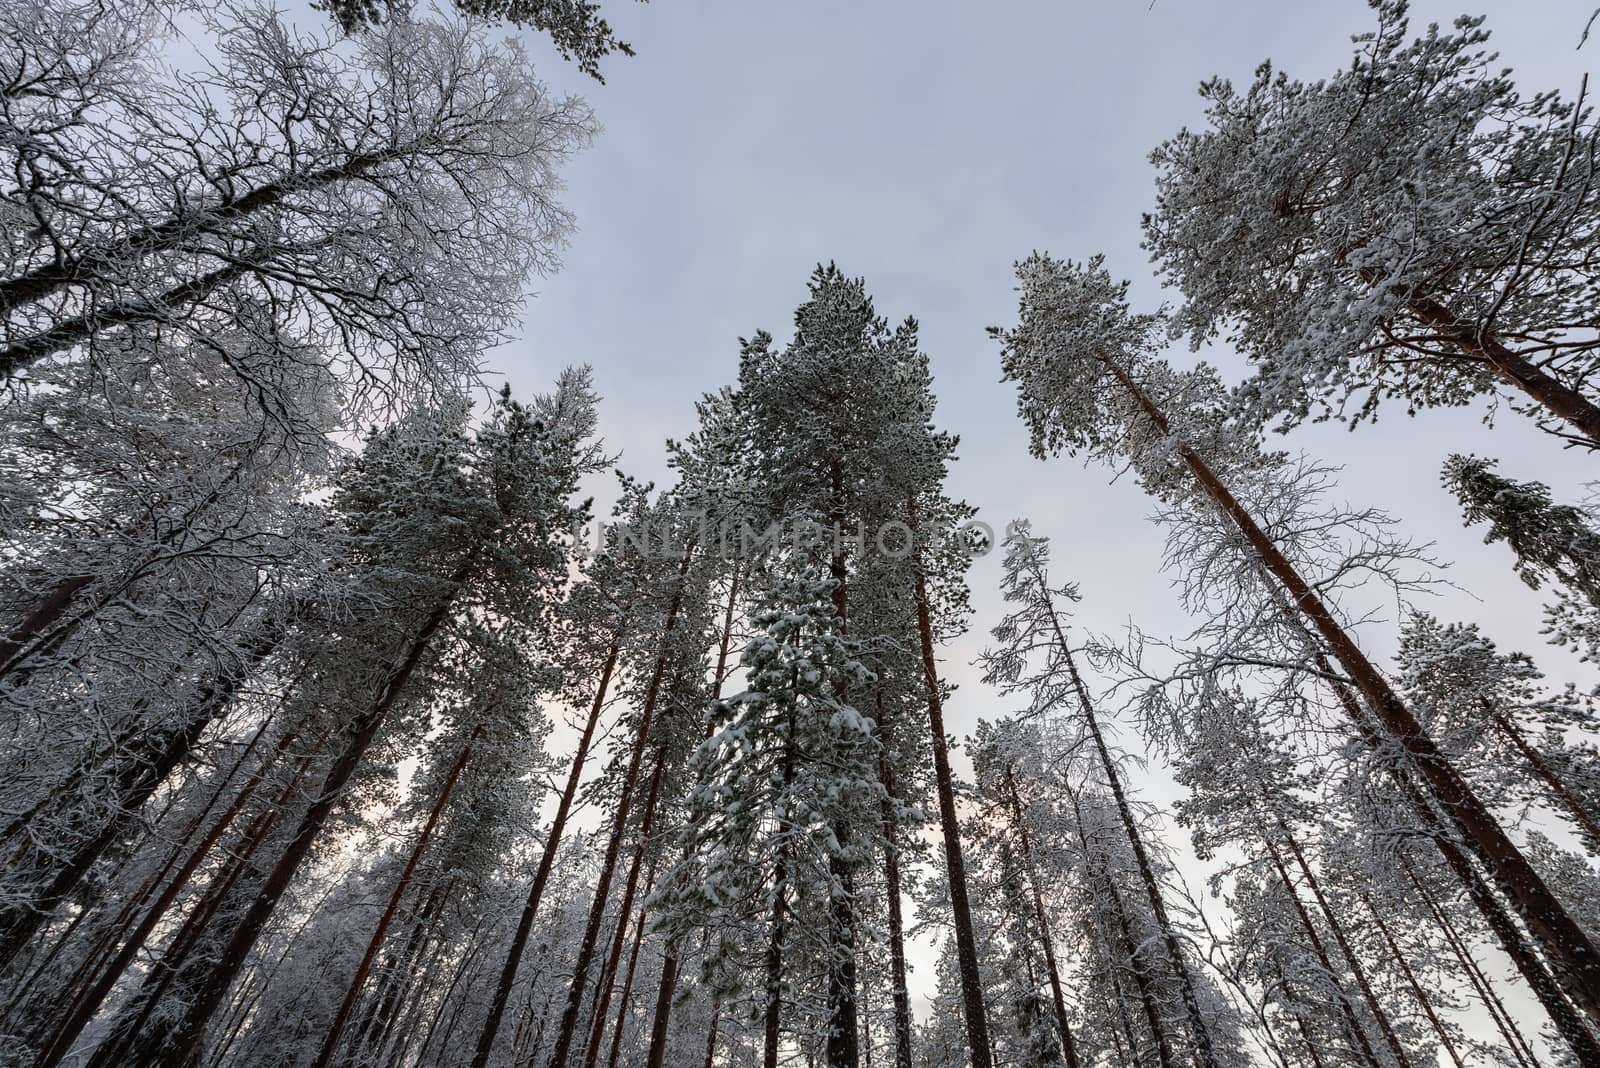 The forest has covered with heavy snow and bad weather sky in winter season at Oulanka National Park, Finland.